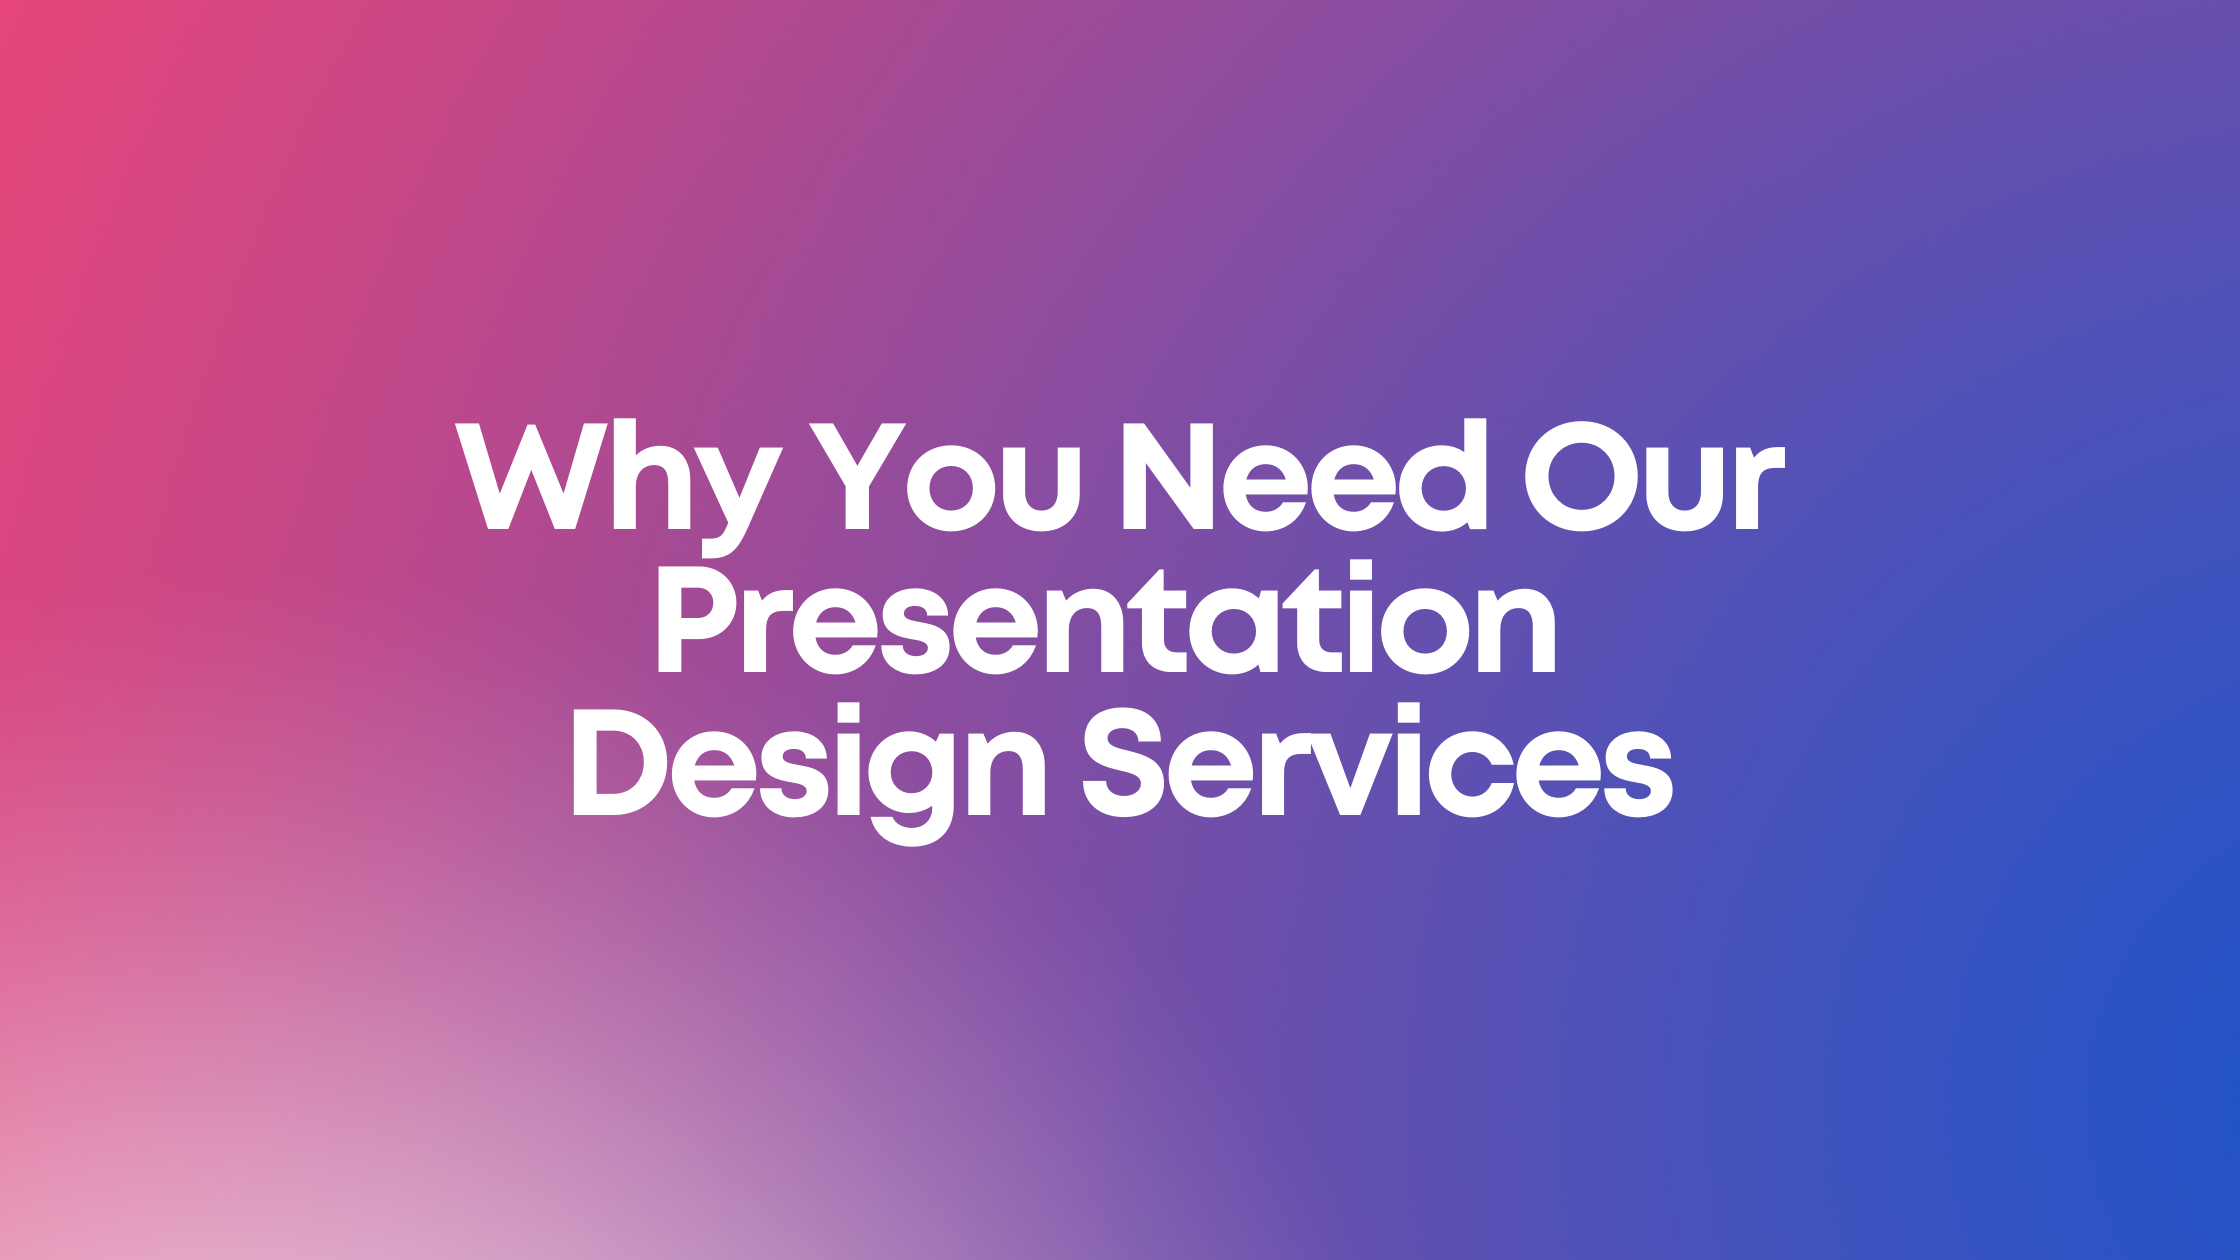 Why You Need Our Presentation Design Services